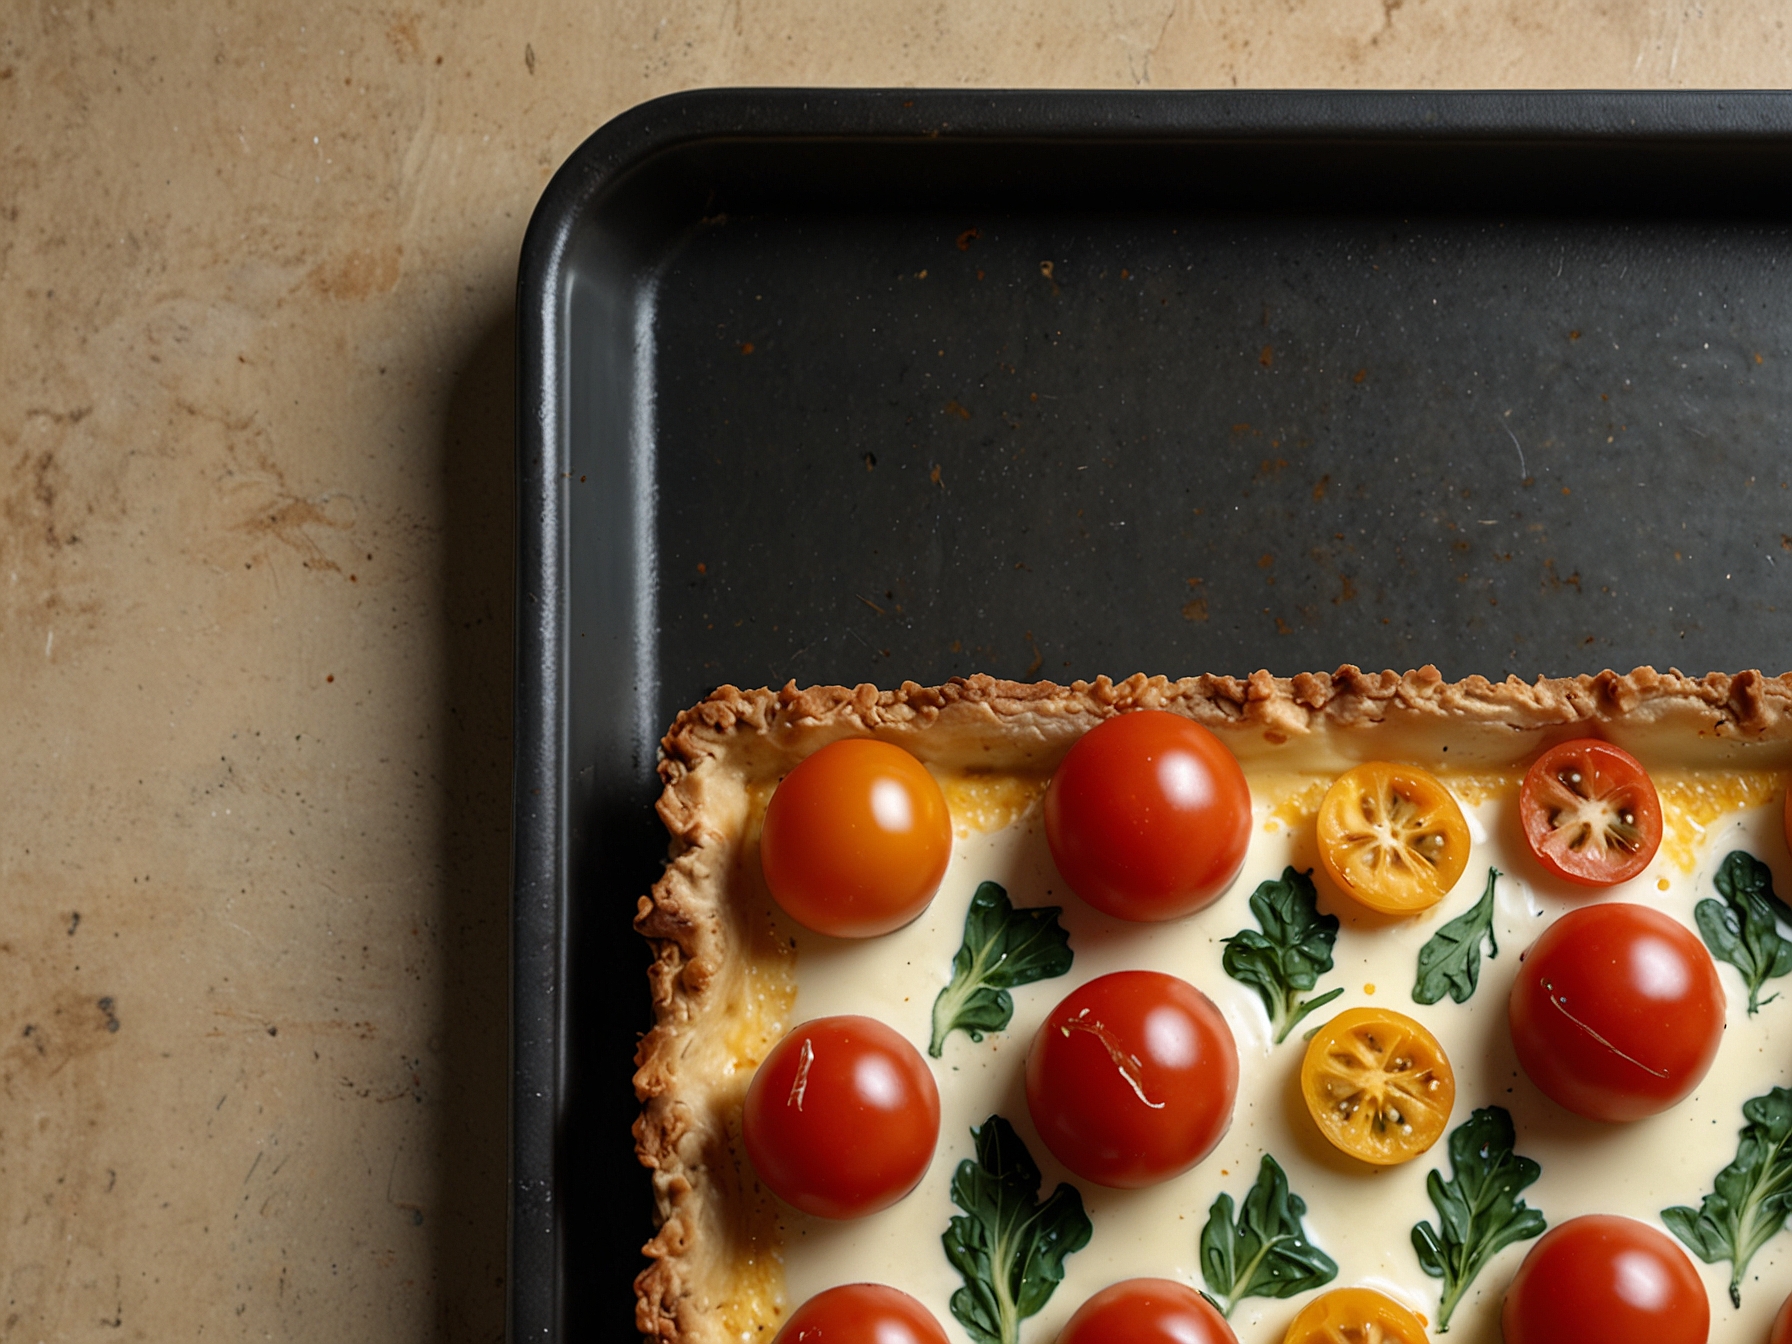 A baking tray filled with Jamie Oliver's 'speedy' quiche traybake, featuring a golden brown crust and colorful mix-ins like cherry tomatoes, spinach, and cheese.